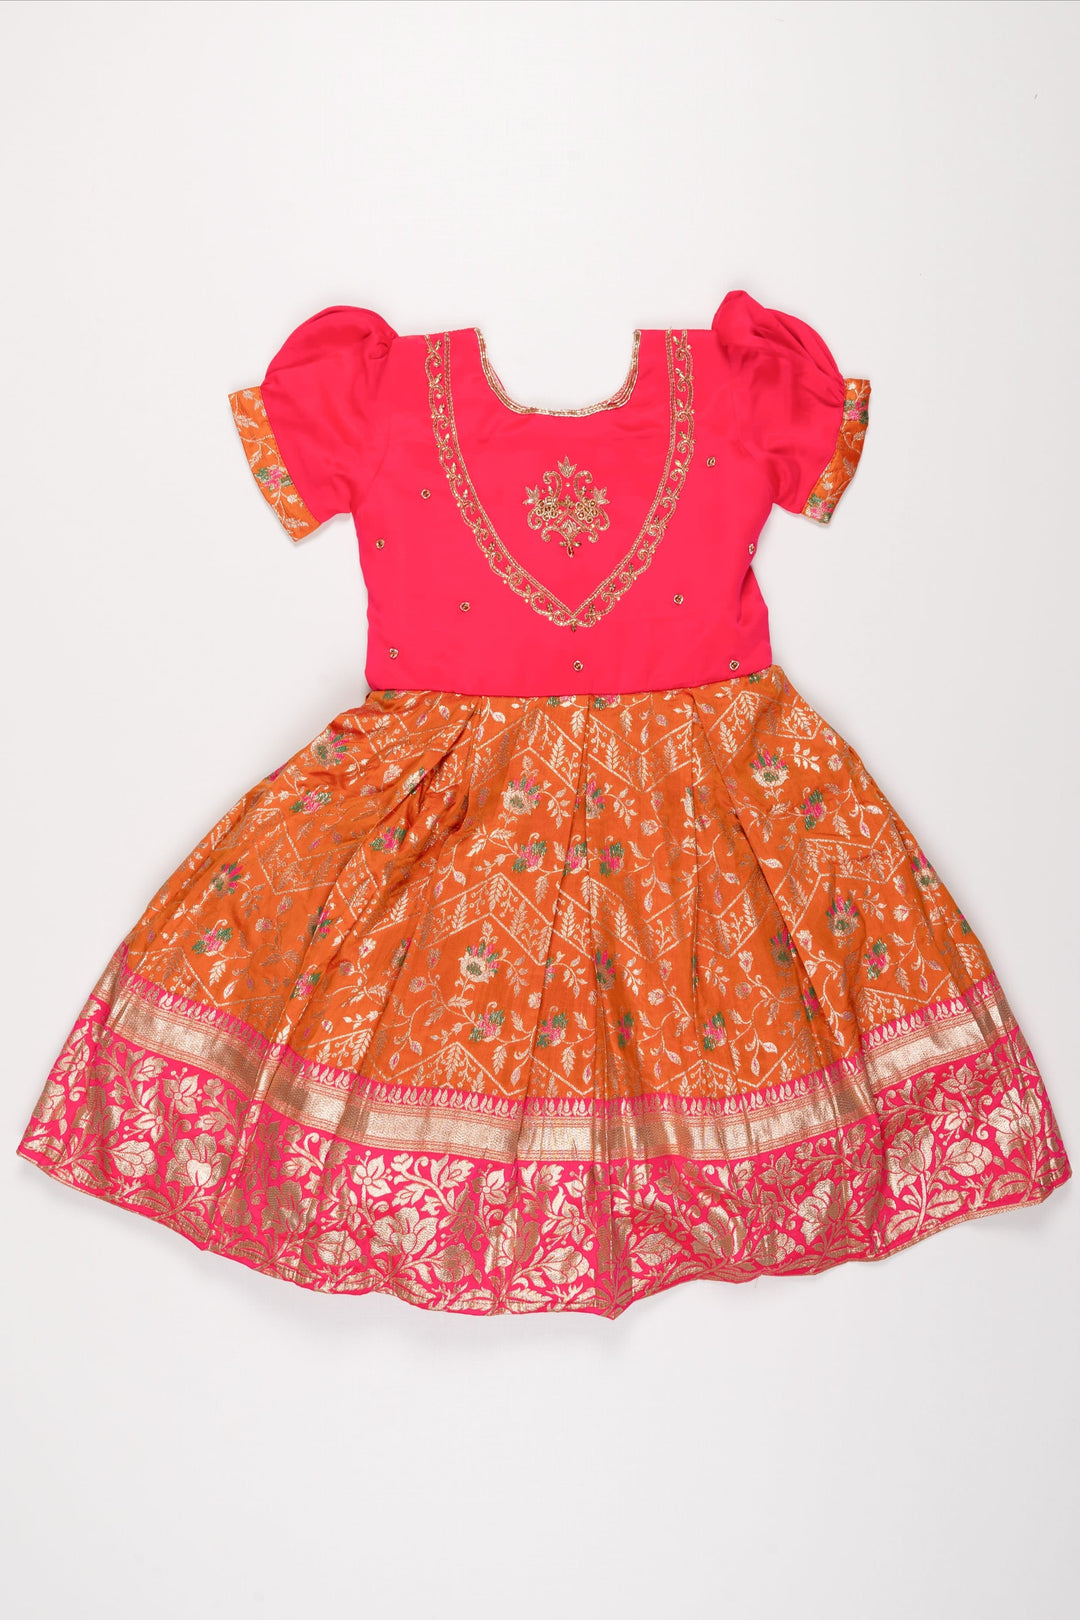 The Nesavu Silk Party Frock Pink Passion Silk Frock with Embroidered Terracotta Skirt for Girls Nesavu 16 (1Y) / Pink SF732A-16 Girls Embroidered Pink & Terracotta Silk Frock | Festive Traditional Dress | The Nesavu